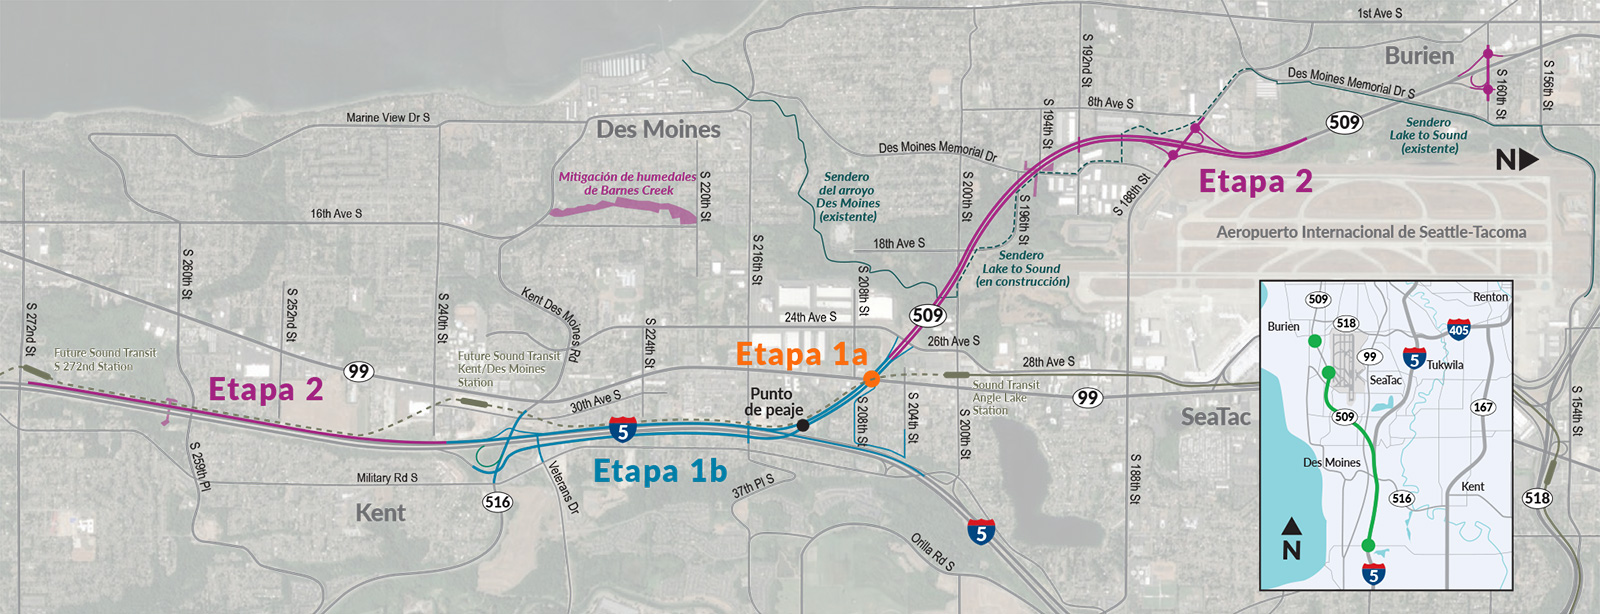 Map of SR 509 Completion Project broken out by project stage, all labels in Spanish.
